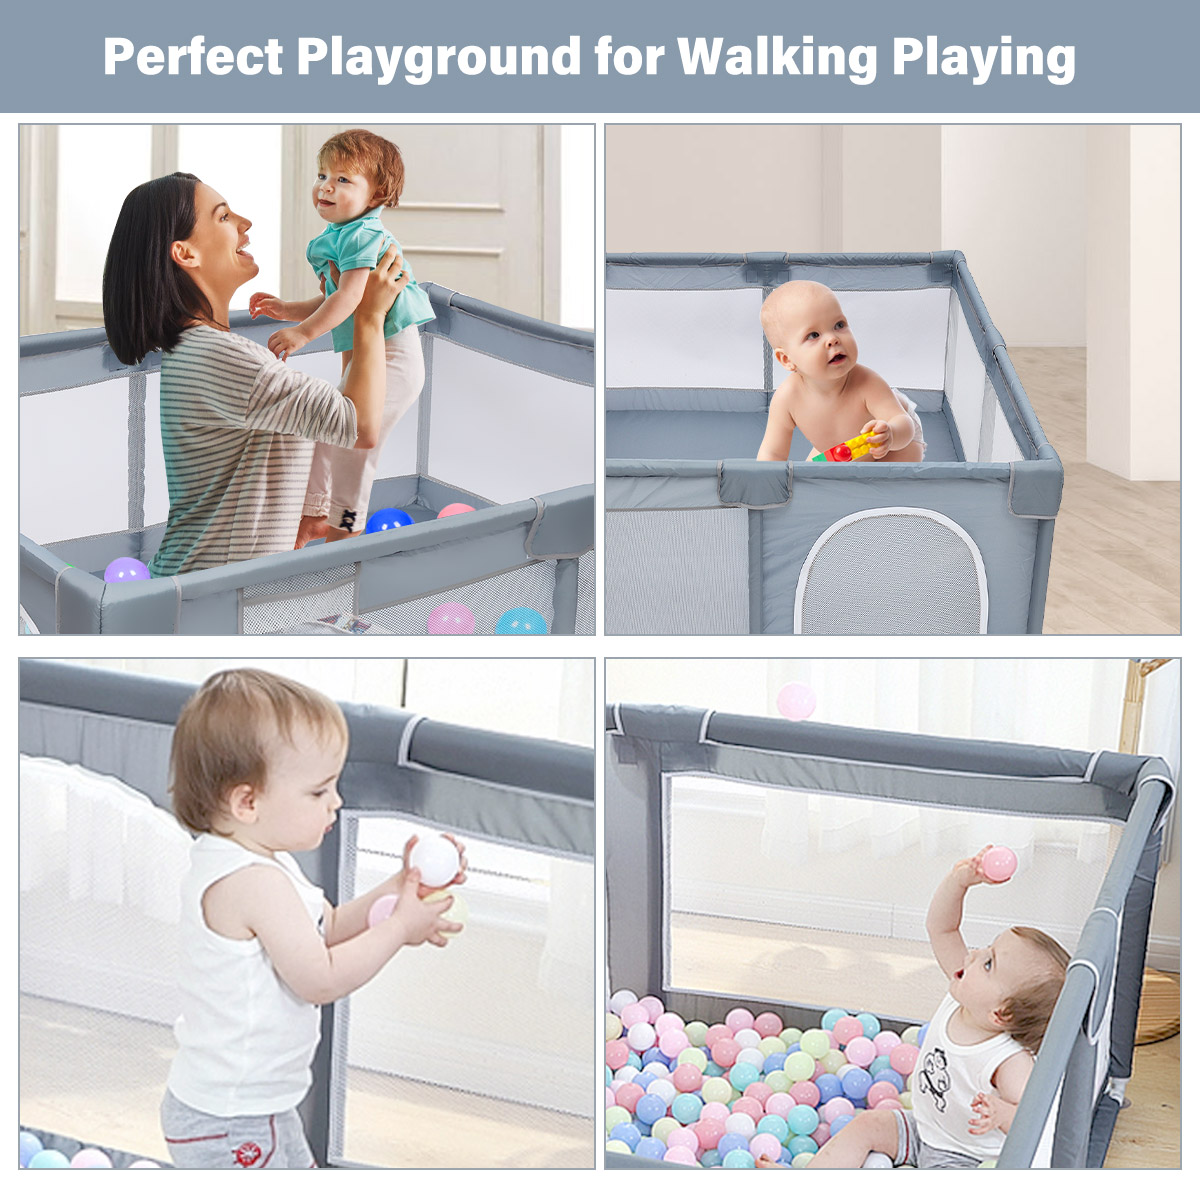 79-Baby-Playpen-Infants-Toddler-Safety-Kids-Packable--Portable-Play-Pens-Activity-Play-Yard-Gate-for-1935215-7